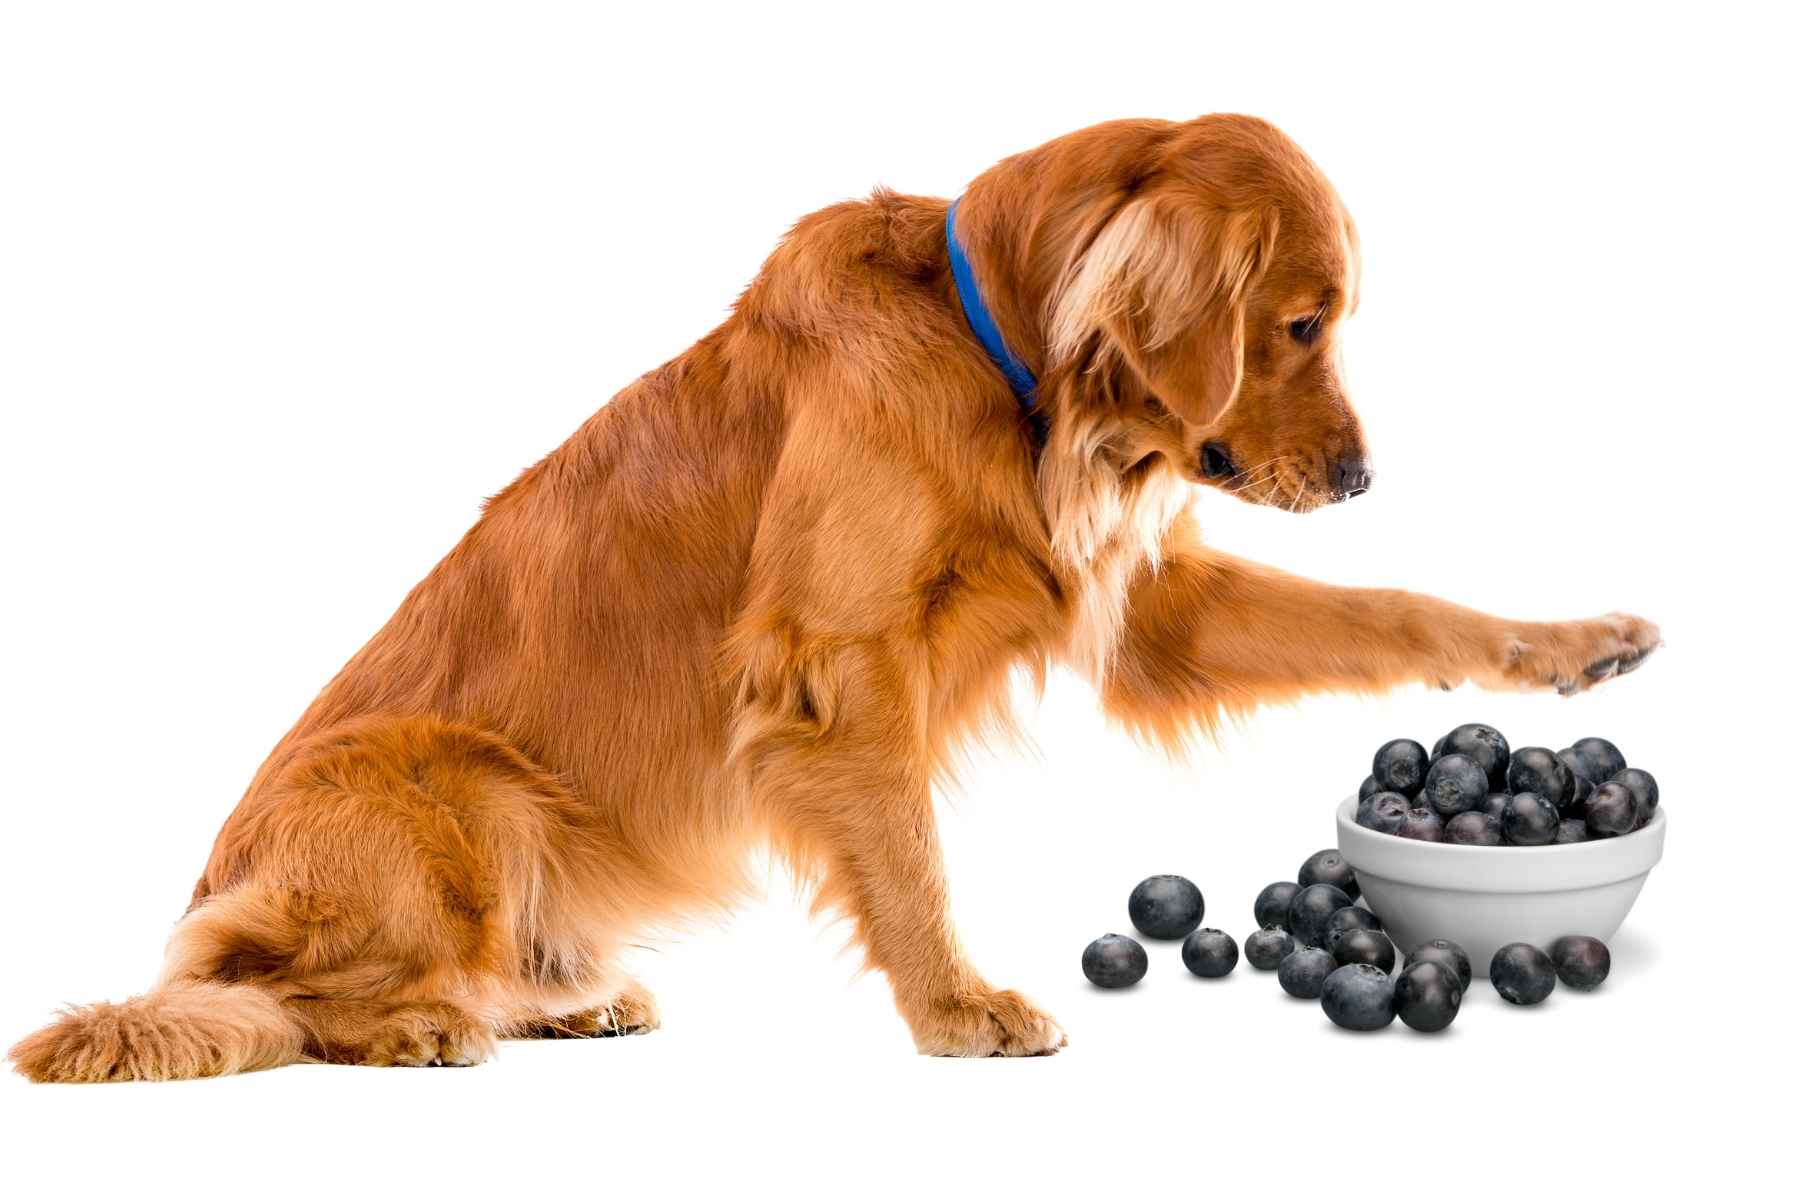 Dog pawing a bowl of blueberries